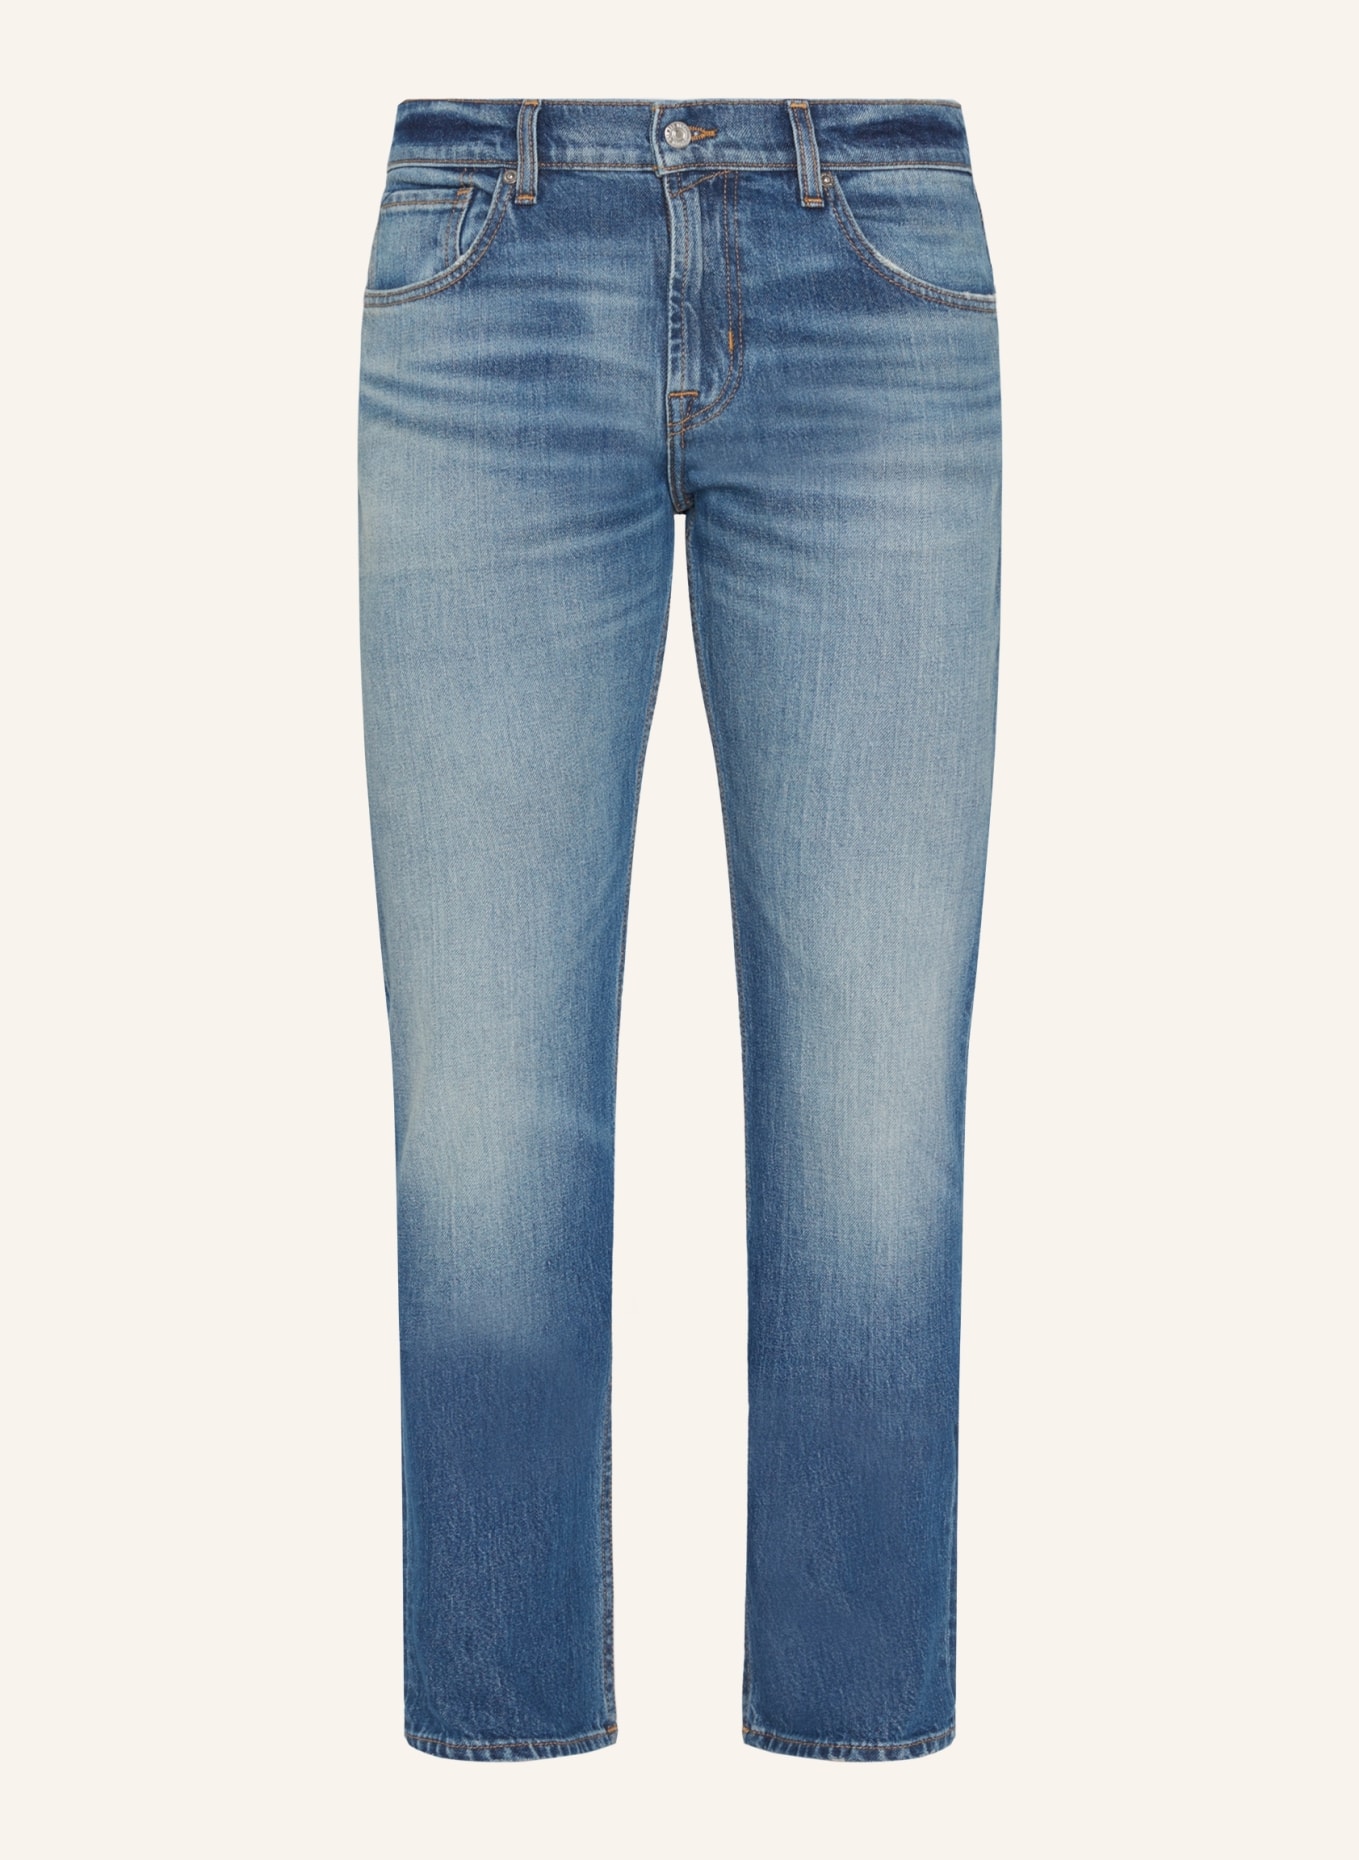 7 for all mankind Jeans  THE STRAIGHT Straight Fit, Farbe: BLAU (Bild 1)